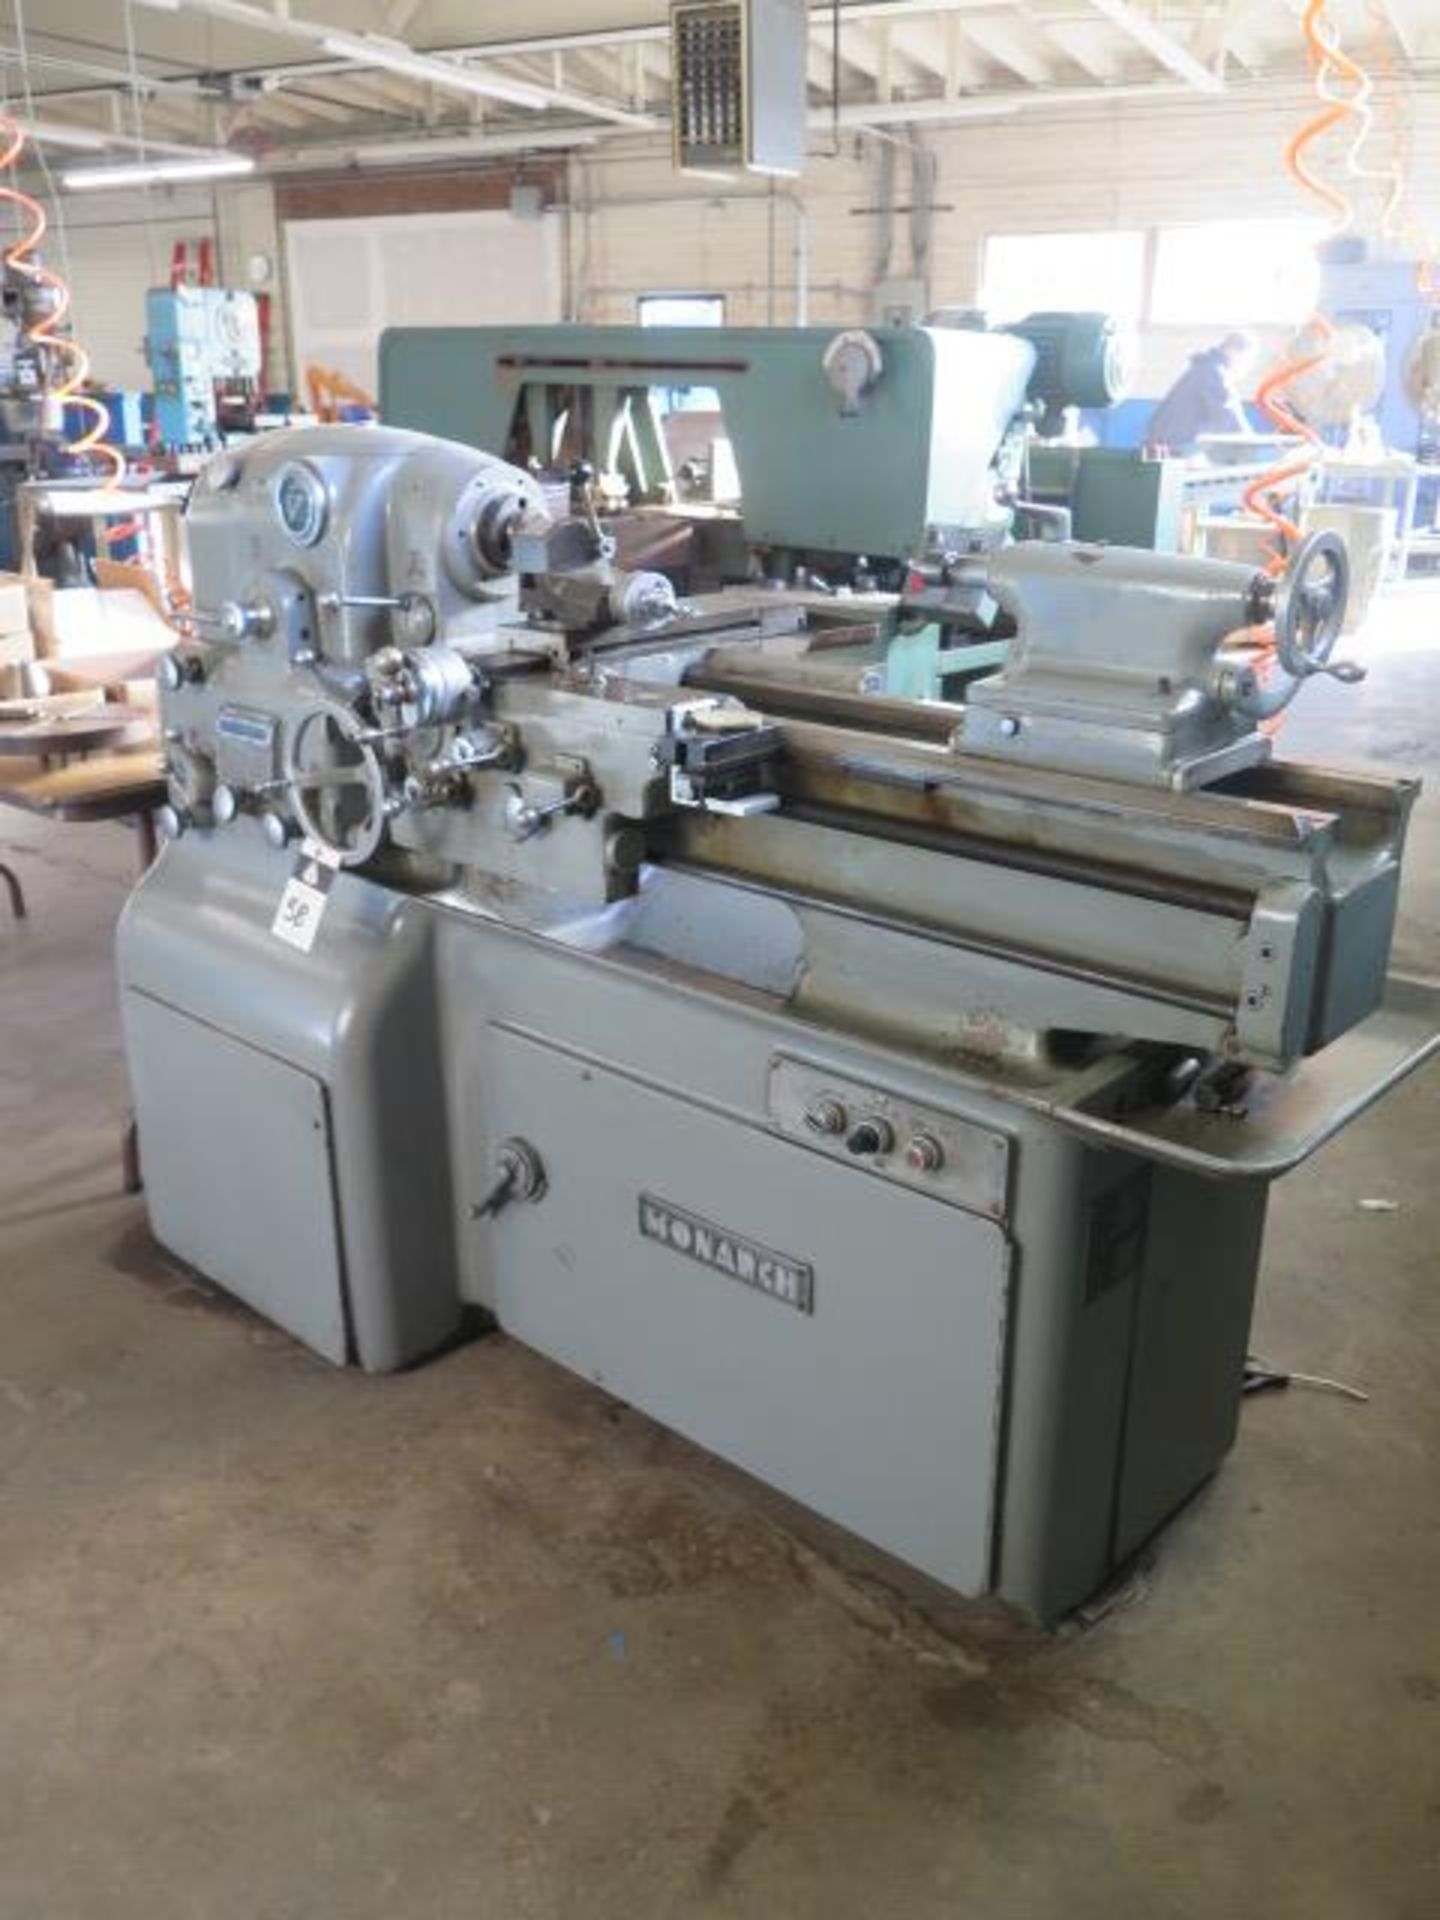 Monarch EE 10” x 30” Tool Room Lathe s/n 46148 w/ 0-4000 RPM, Taper Attachment, SOLD AS IS - Image 2 of 25